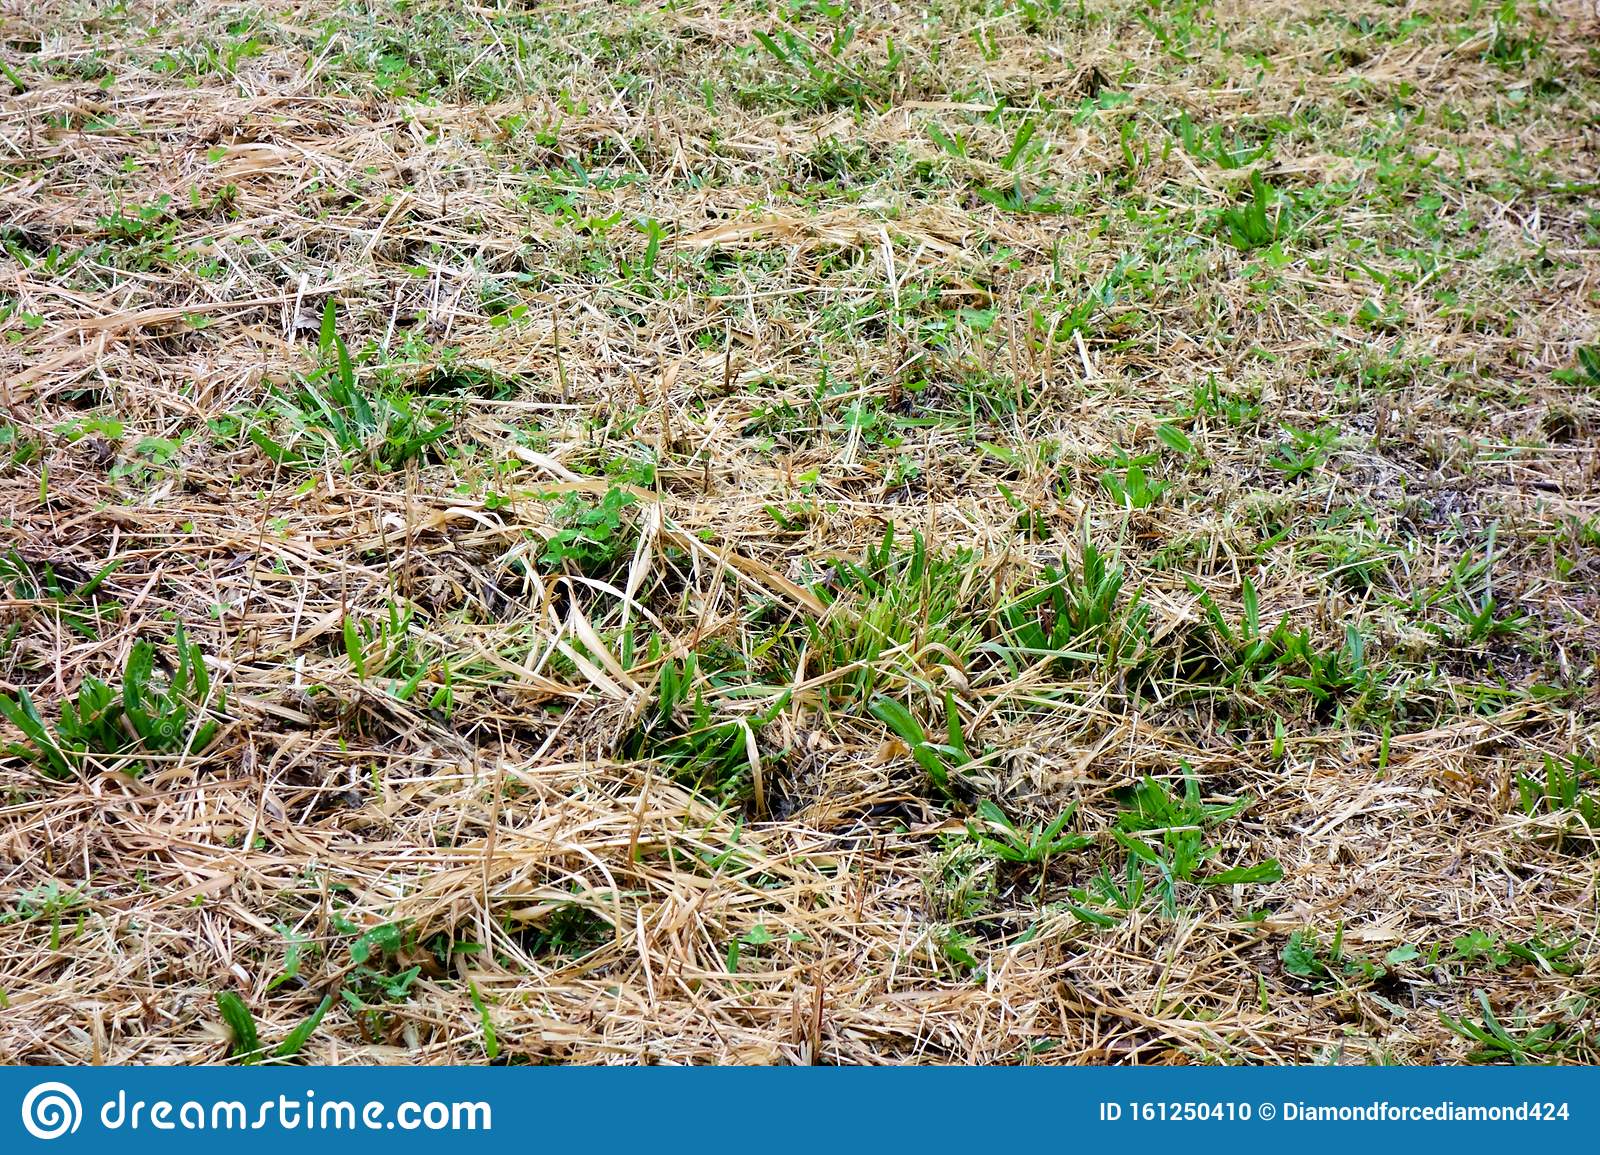 Vacant Lots Of Weeds And Lawns Stock Photo